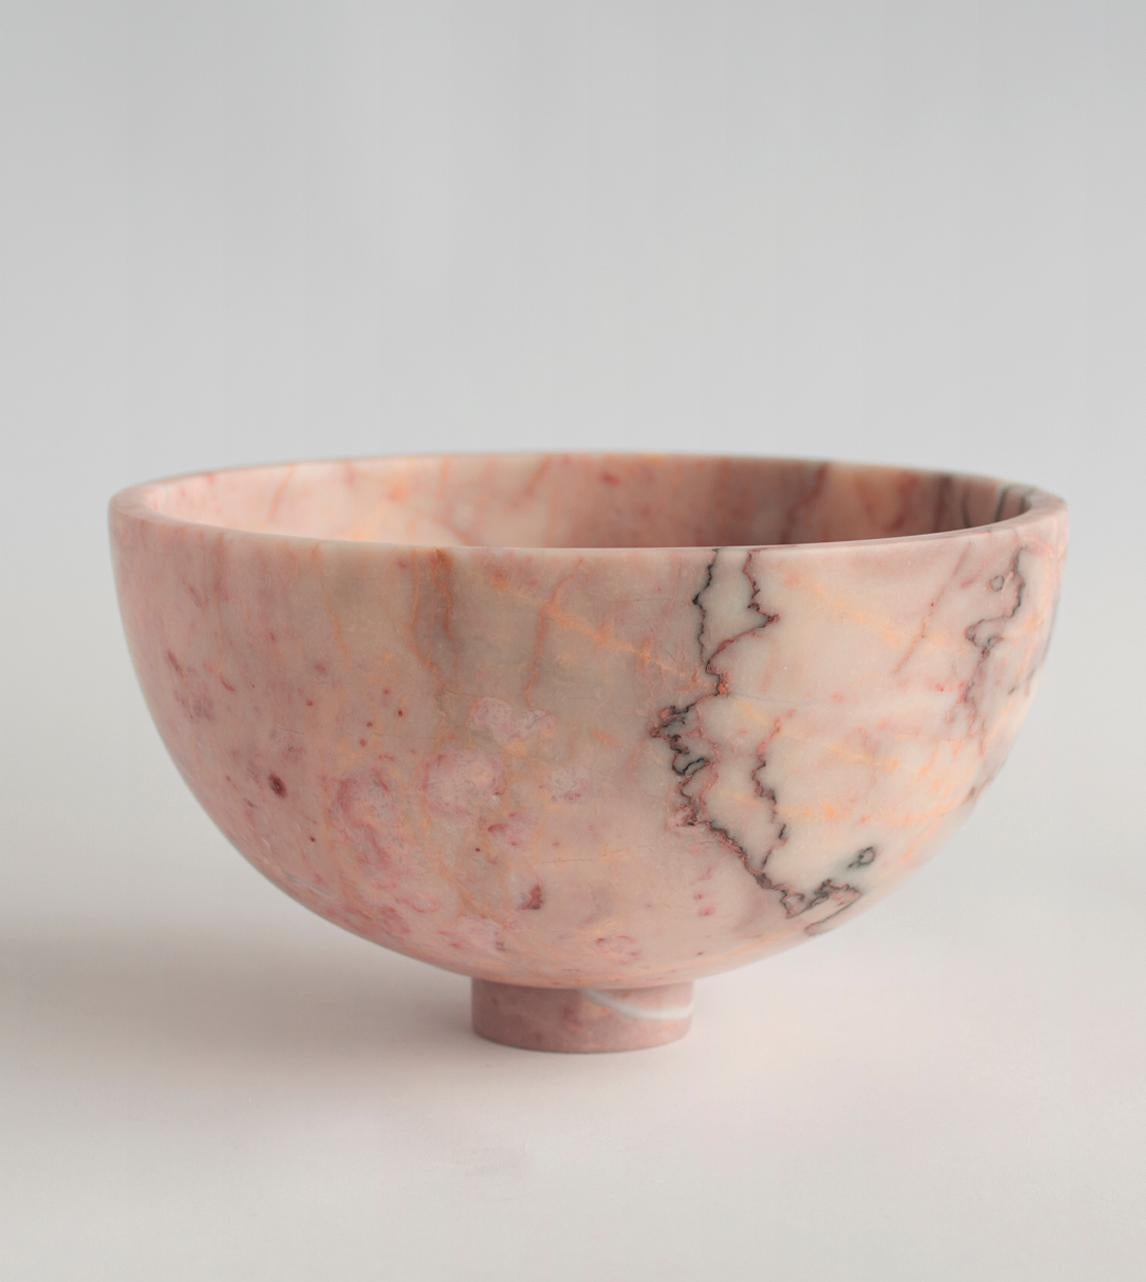 A substantial pink marble bowl with unique white veining rests atop a mini pedestal for a grand presentation of fruits and vegetables. It is truly an eyecatcher in your dining room. 

There may be natural variations that are not product flaws,